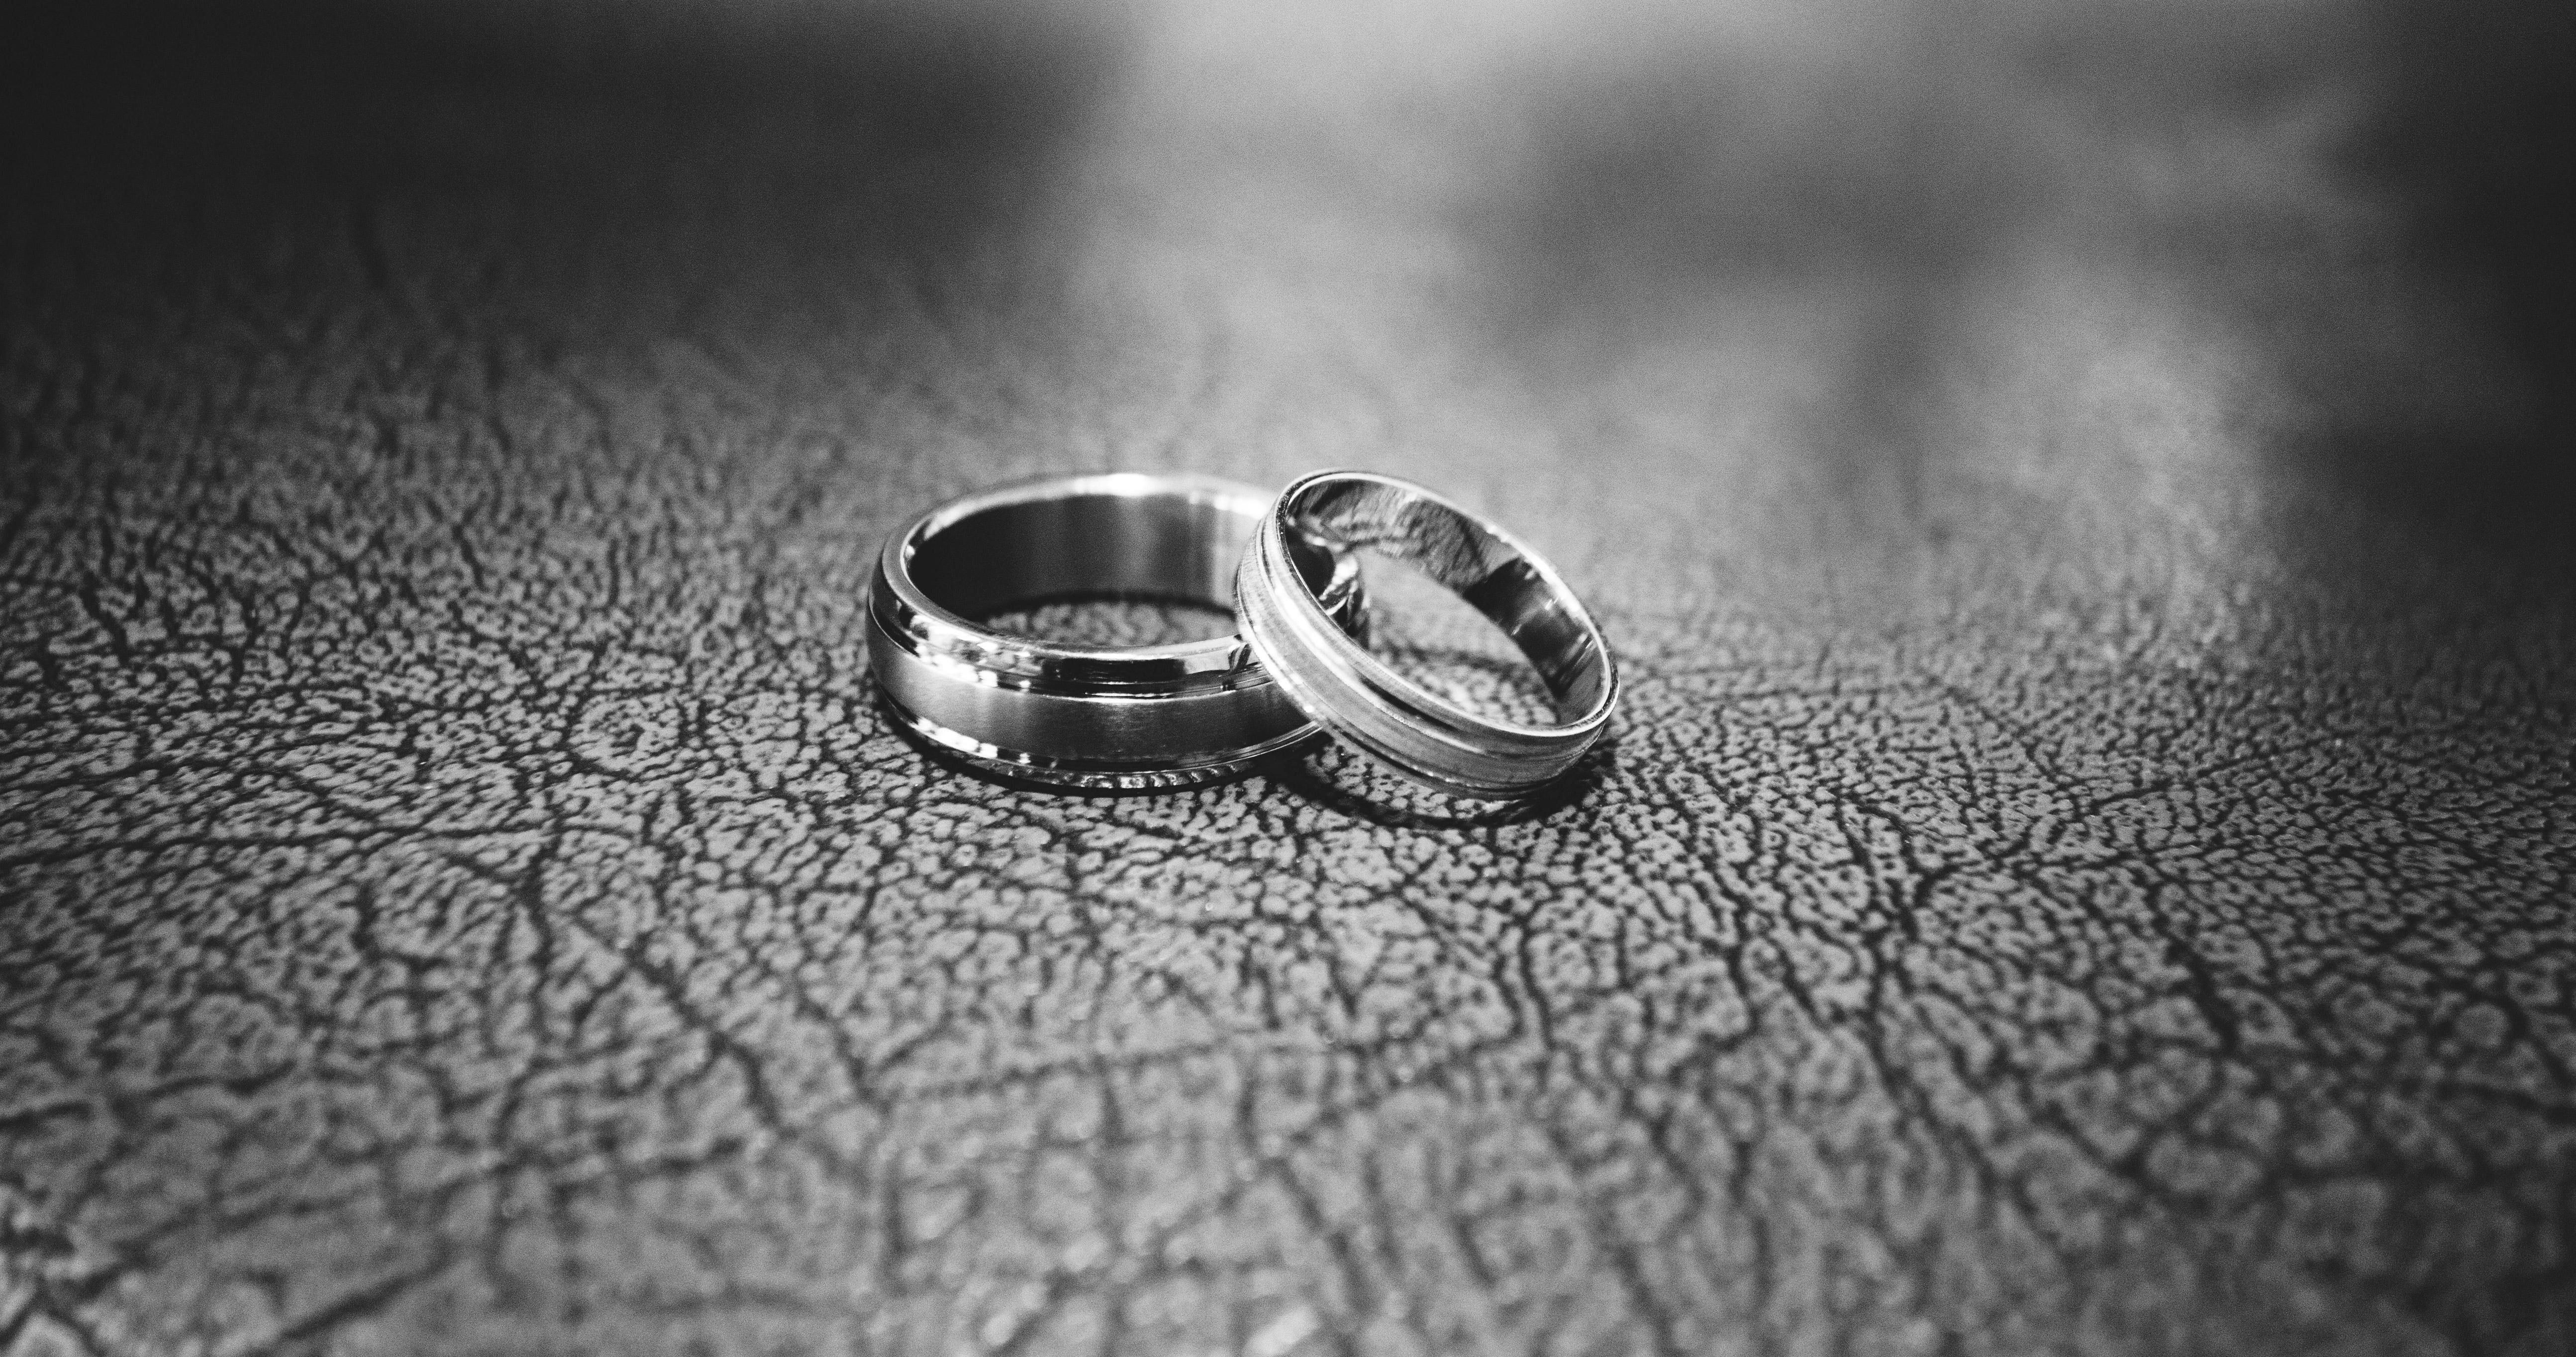 Wedding Ring Background Images HD Pictures and Wallpaper For Free Download   Pngtree